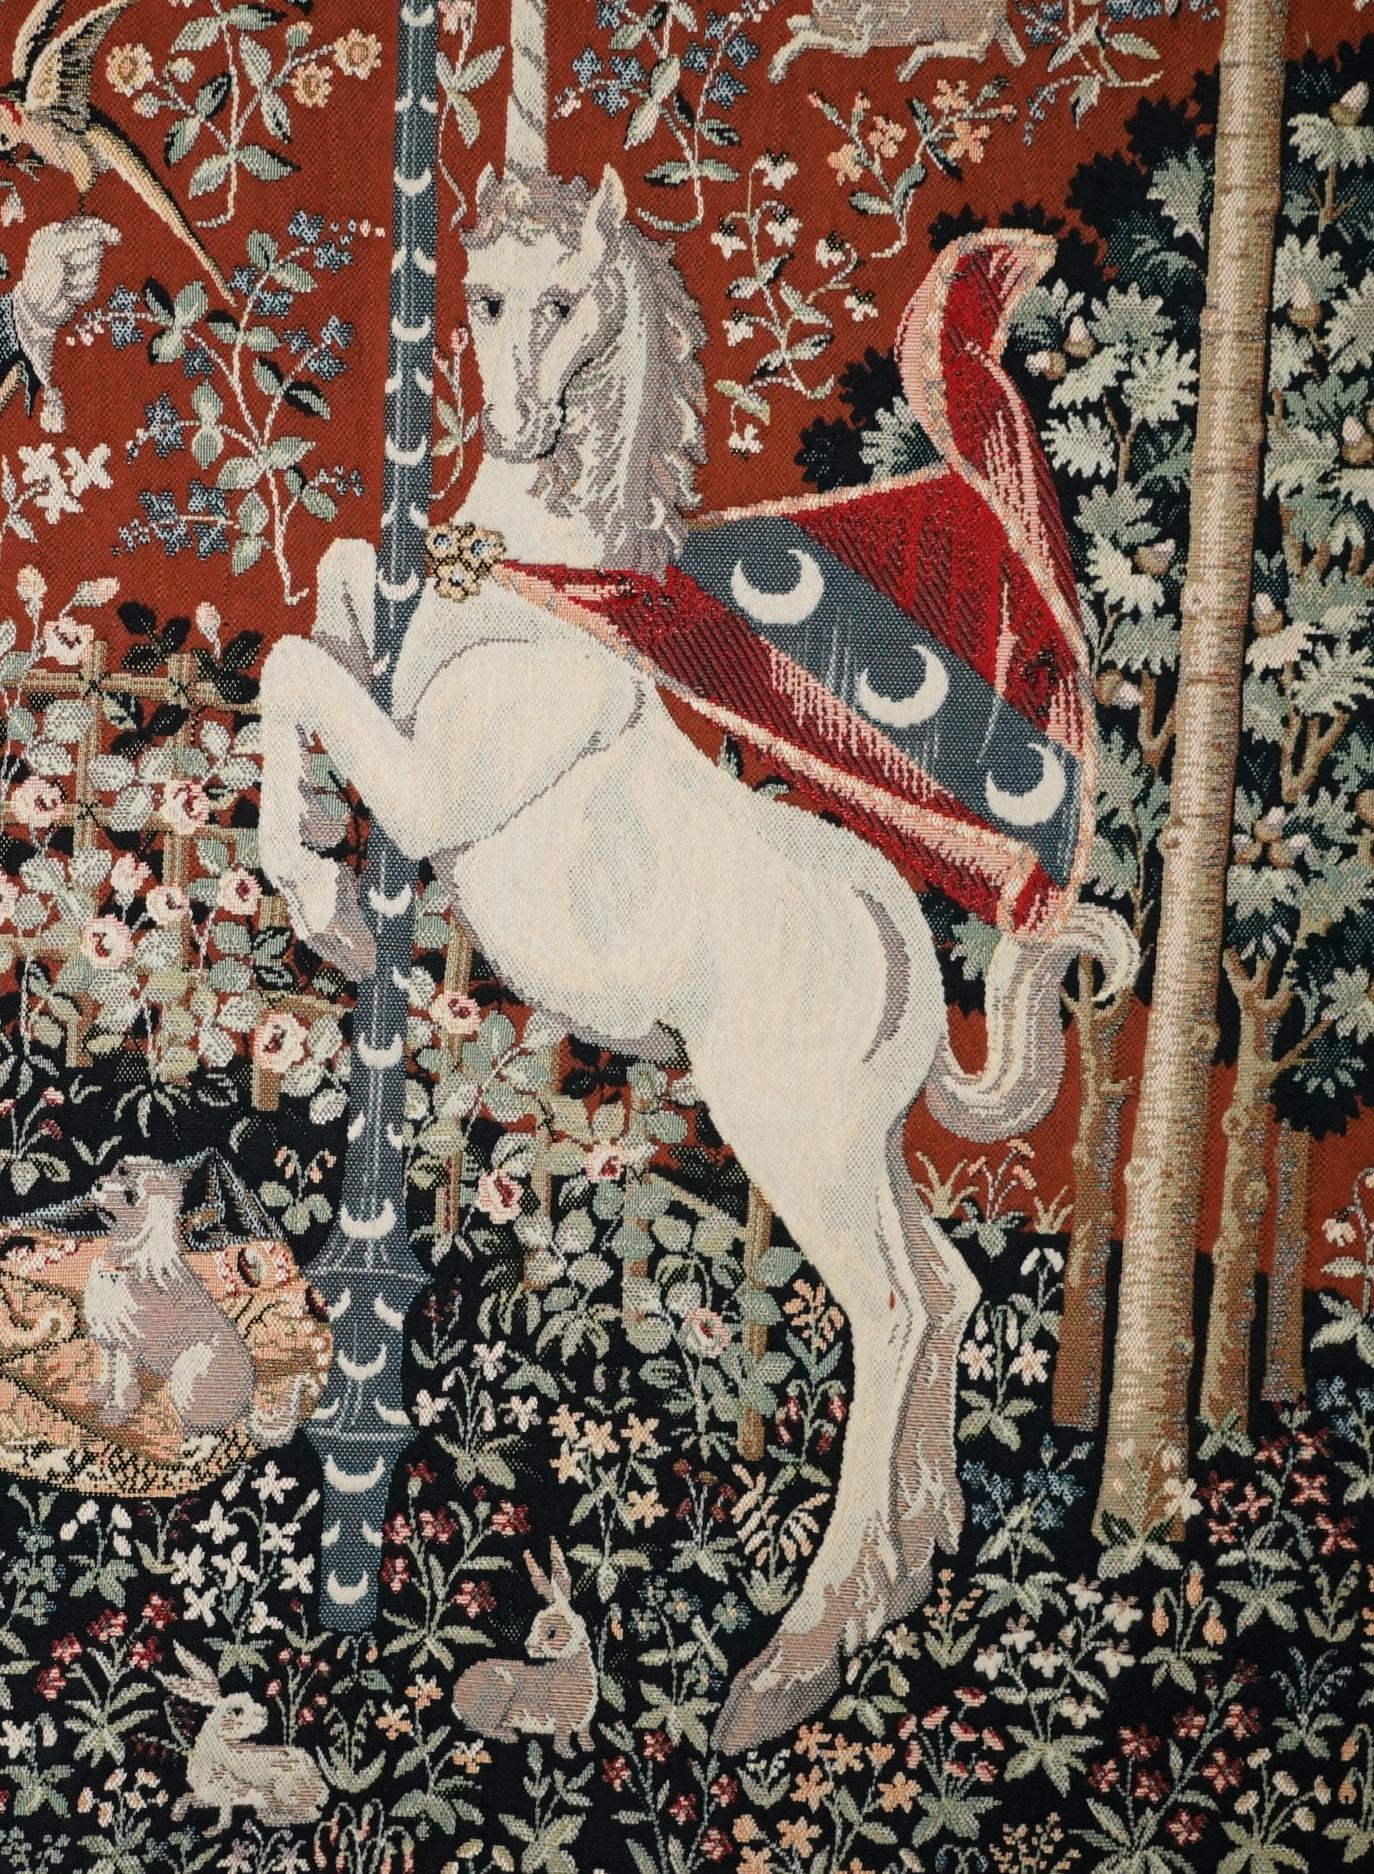 Fabric ViNTAGE THE LADY AND THE UNICORN LARGE WALL HANGING WOVEN TAPESTRY 216CM X 189CM